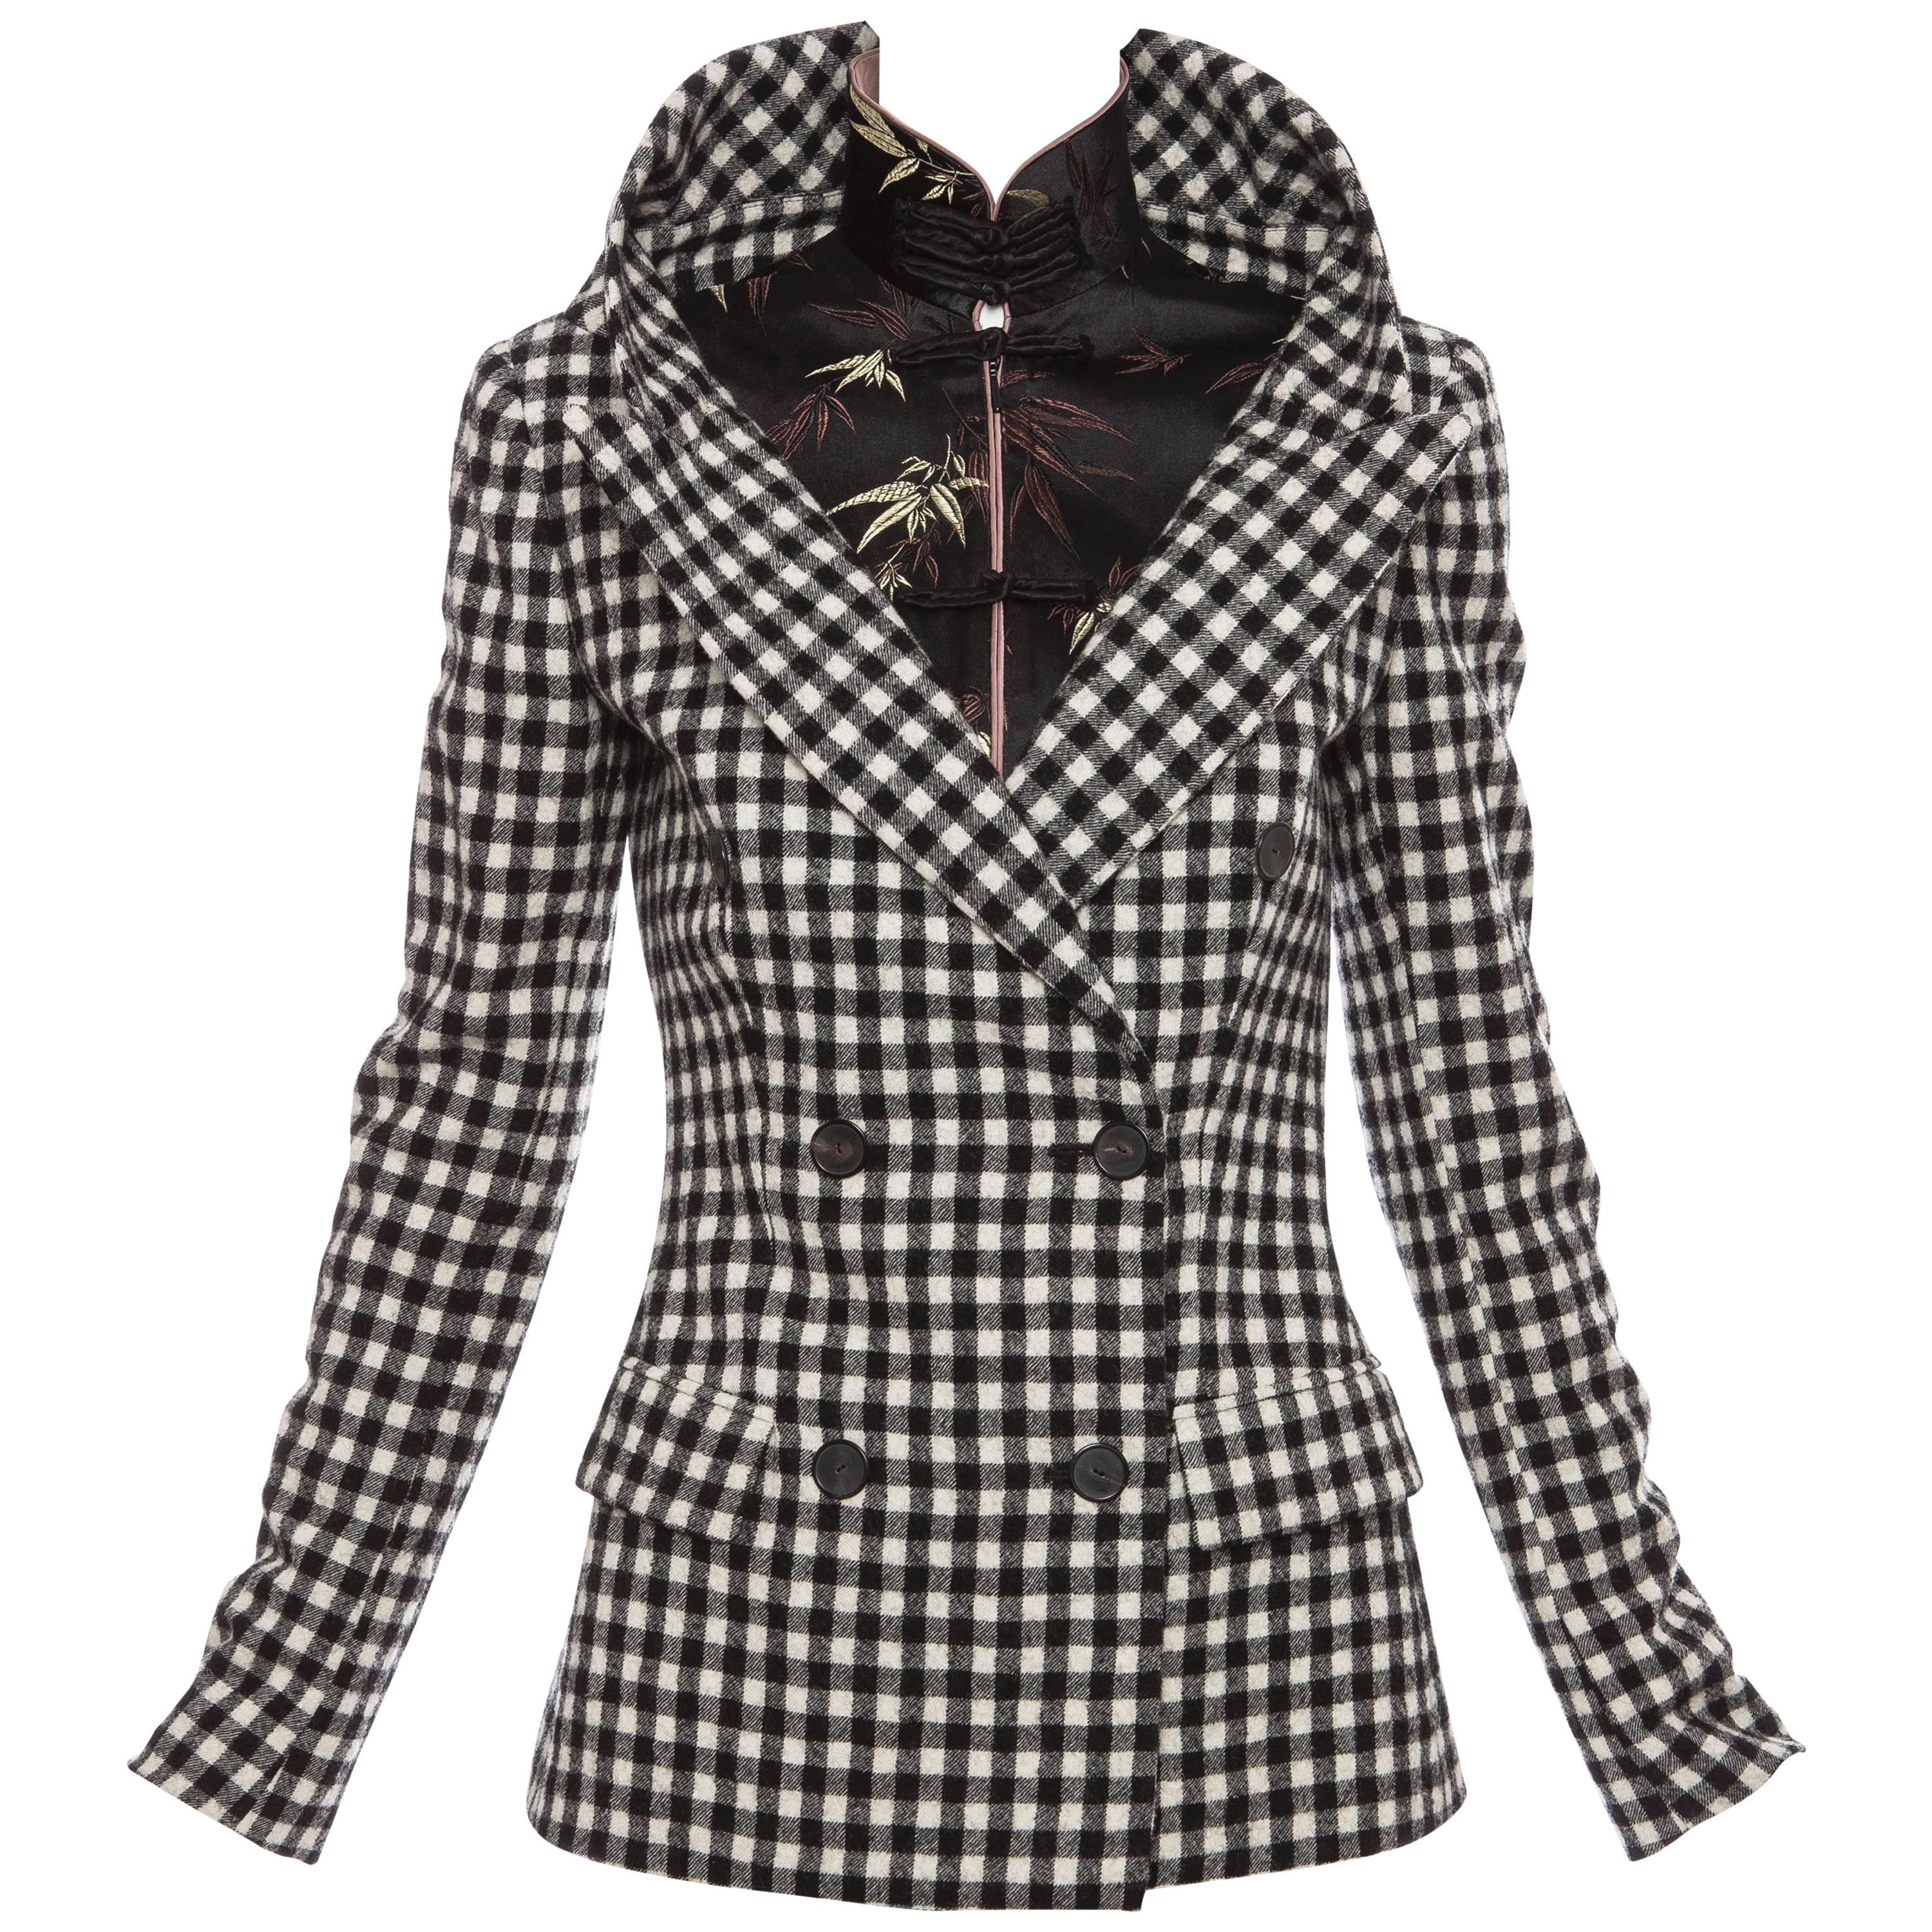 Jean Paul Gaultier Wool Buffalo Check & Embroidered Satin Jacket, Fall 2010 For Sale